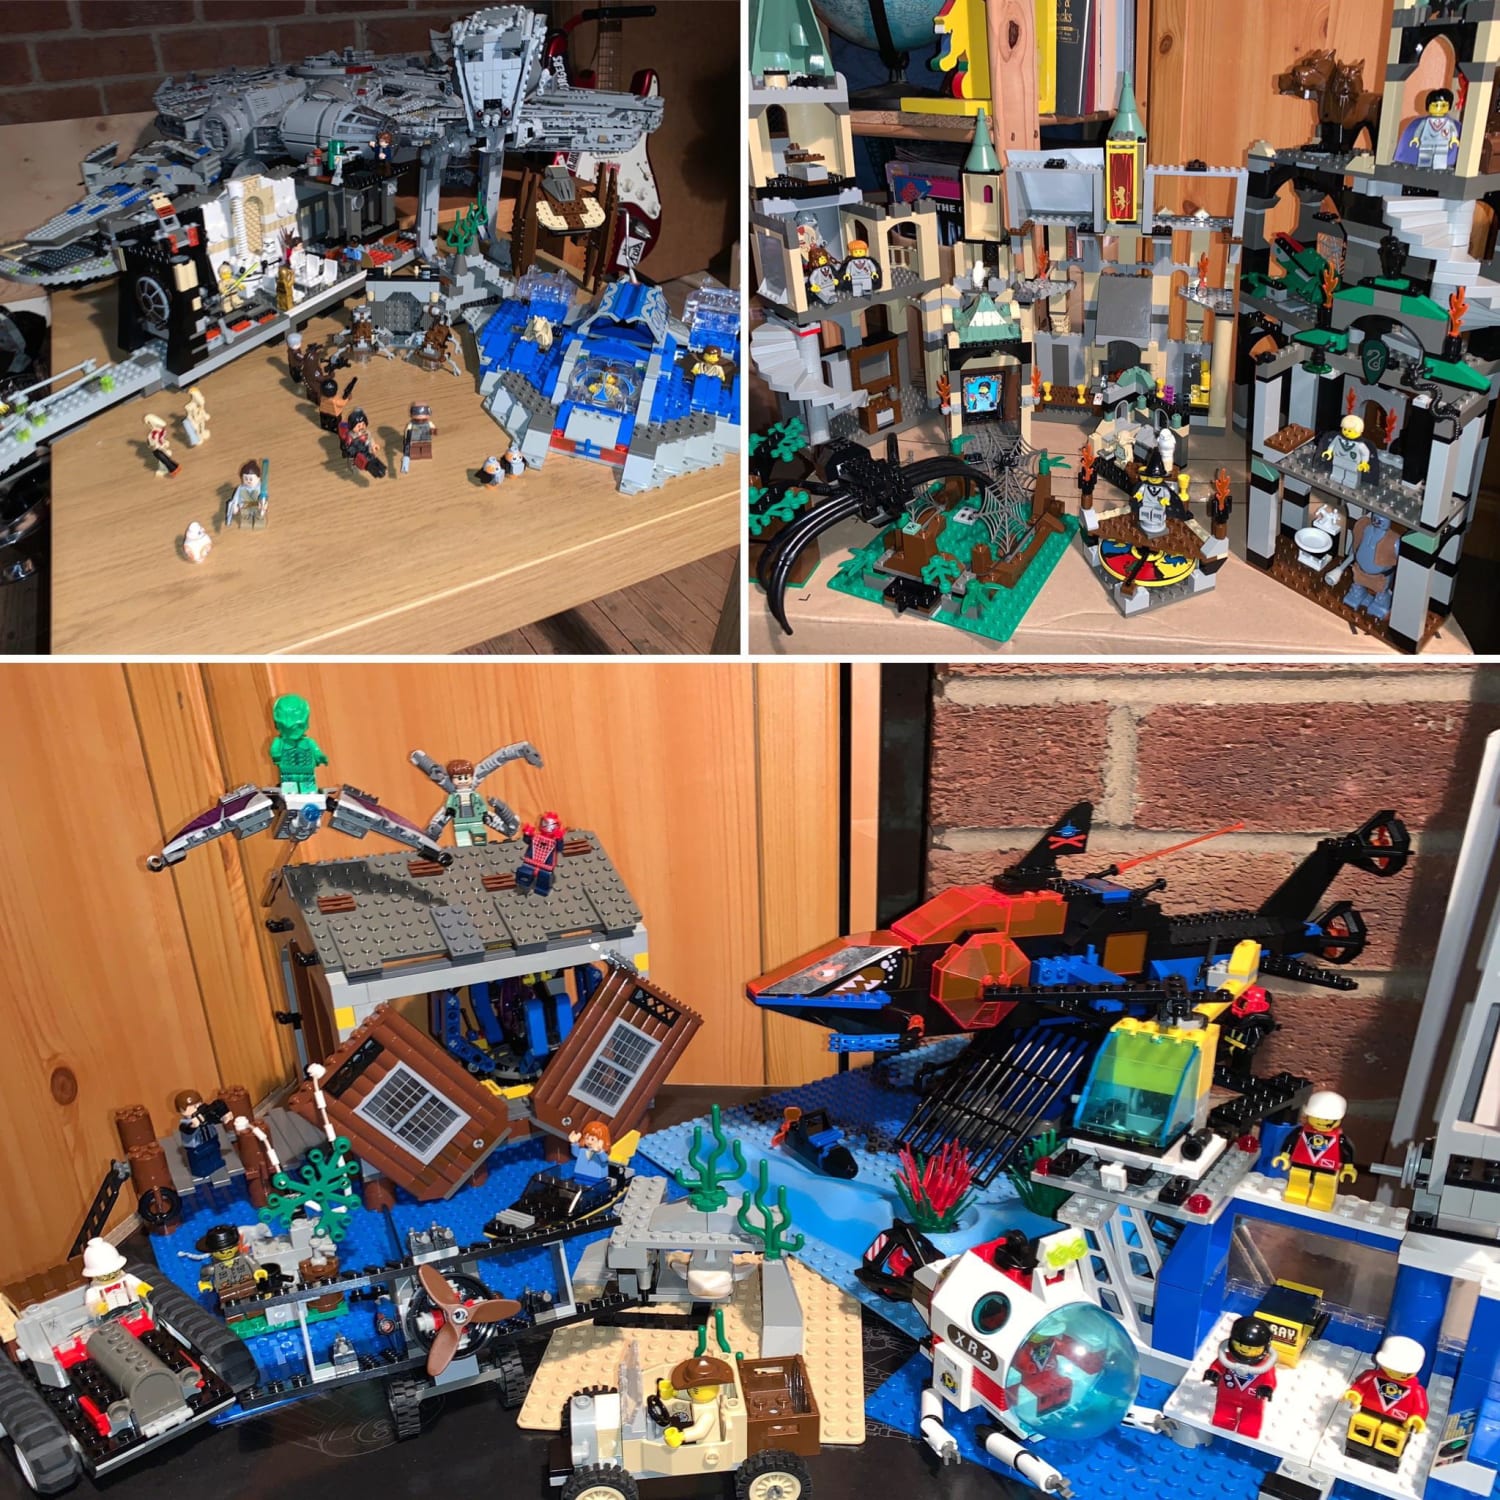 Shoutout to my parents for never having a Lego clear out!